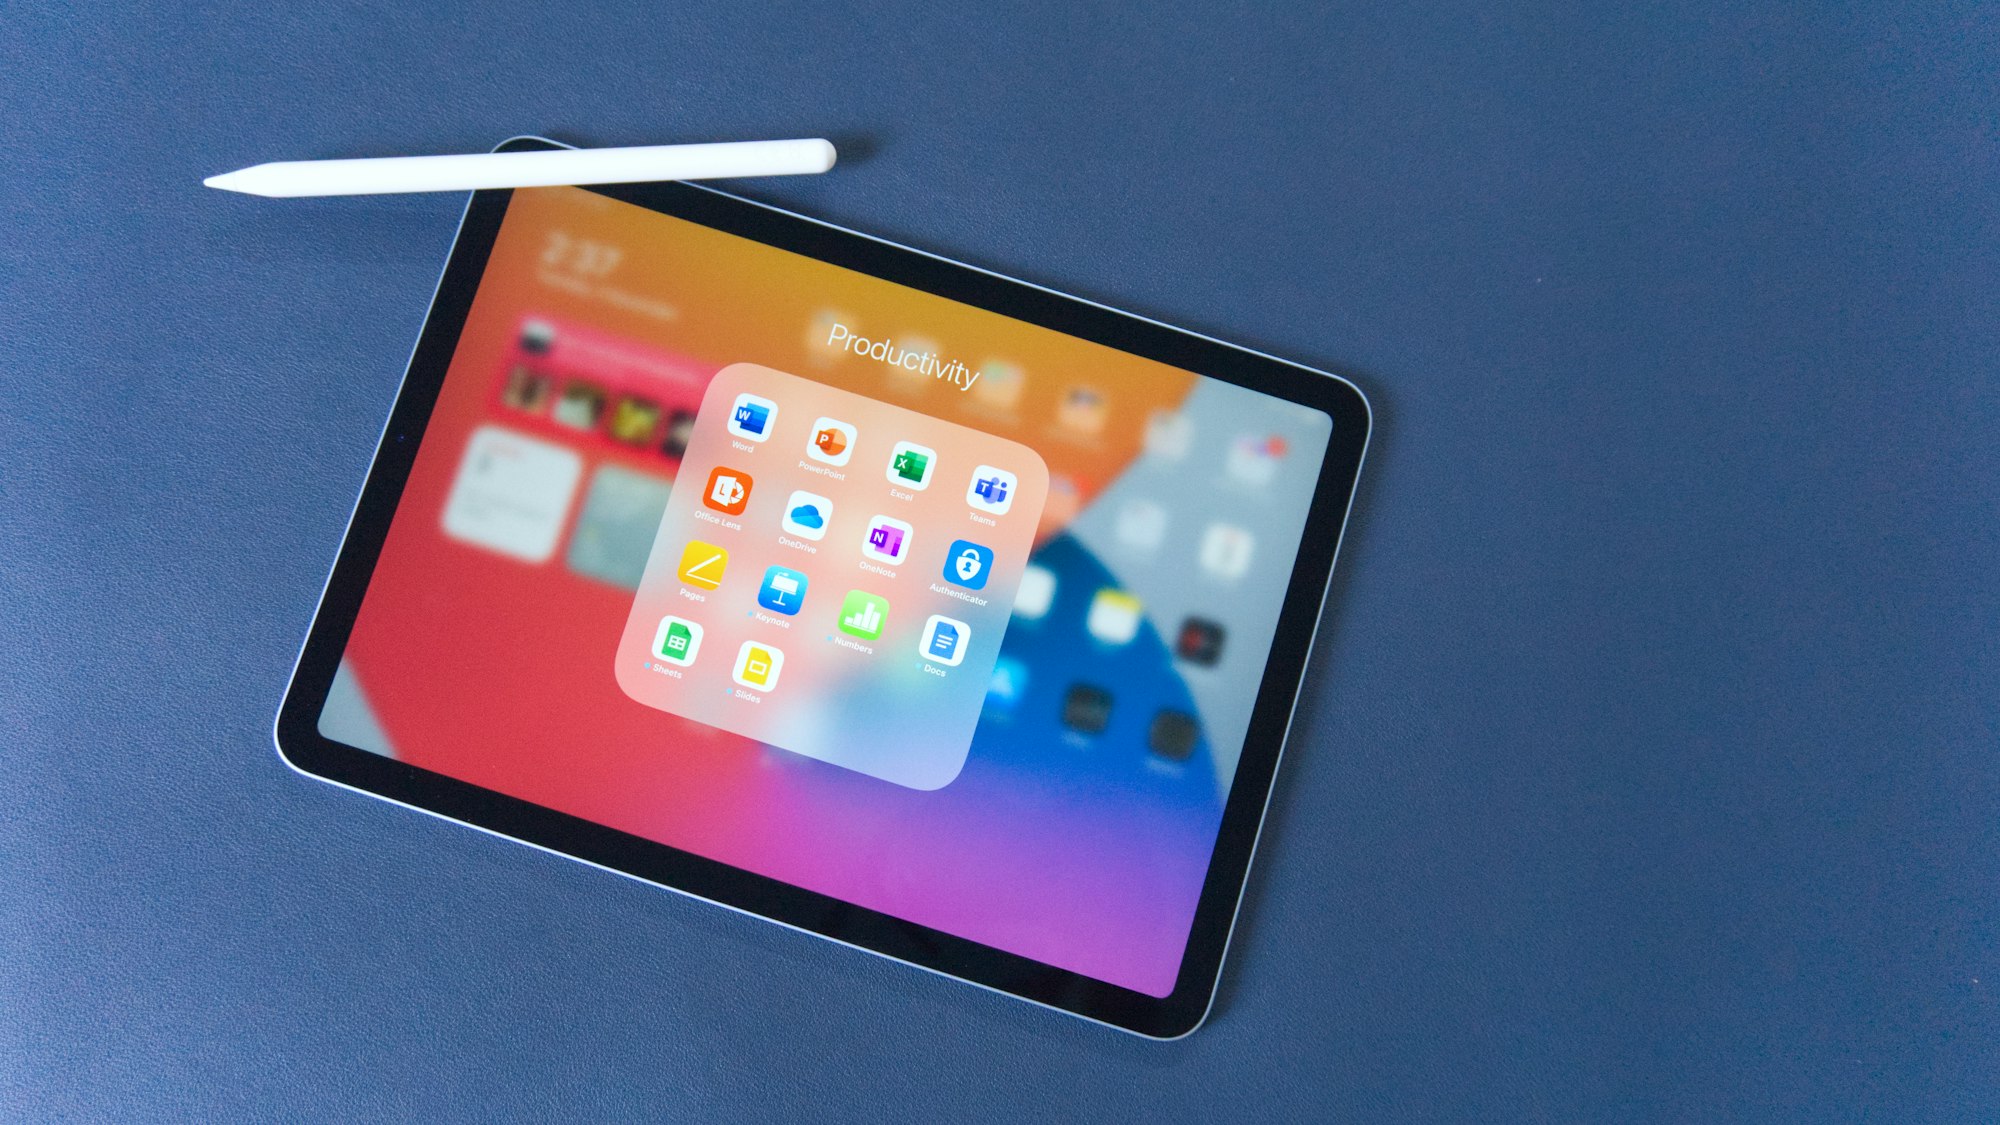 iPad Air 4th Generation showing Productivity Apps With Apple Pencil 2nd Generation